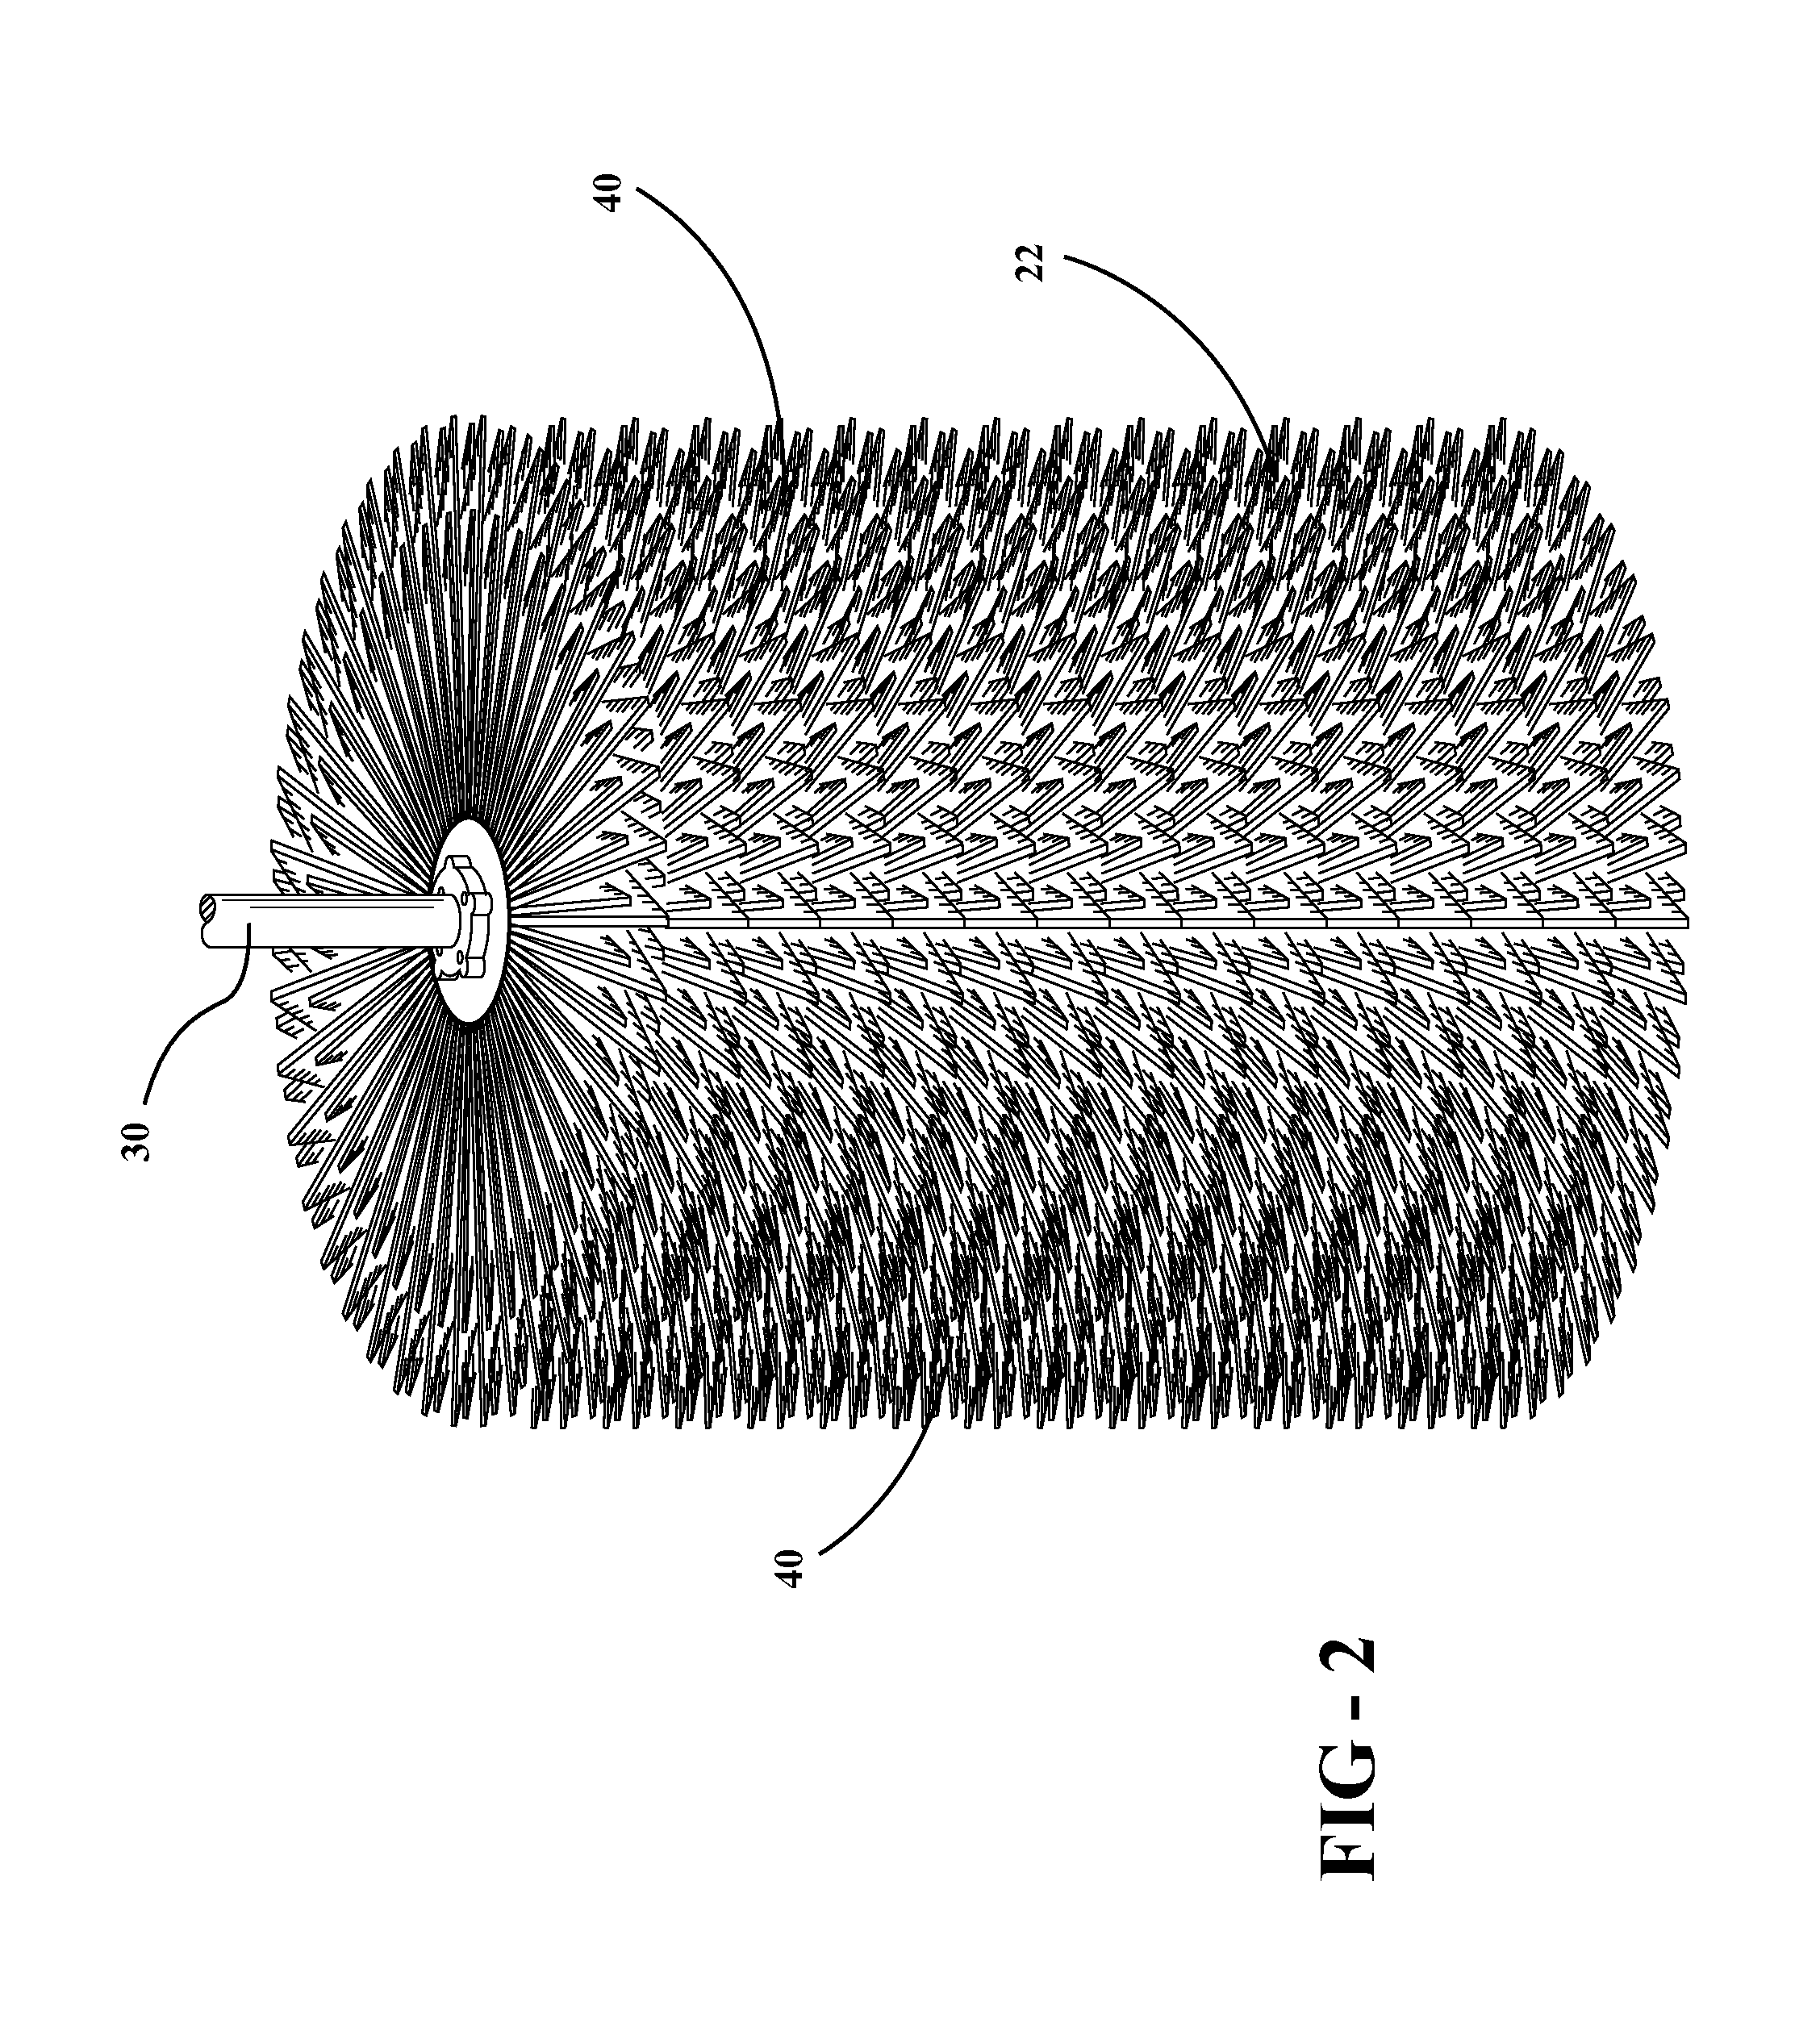 Absorbent media element for a vehicle wash component